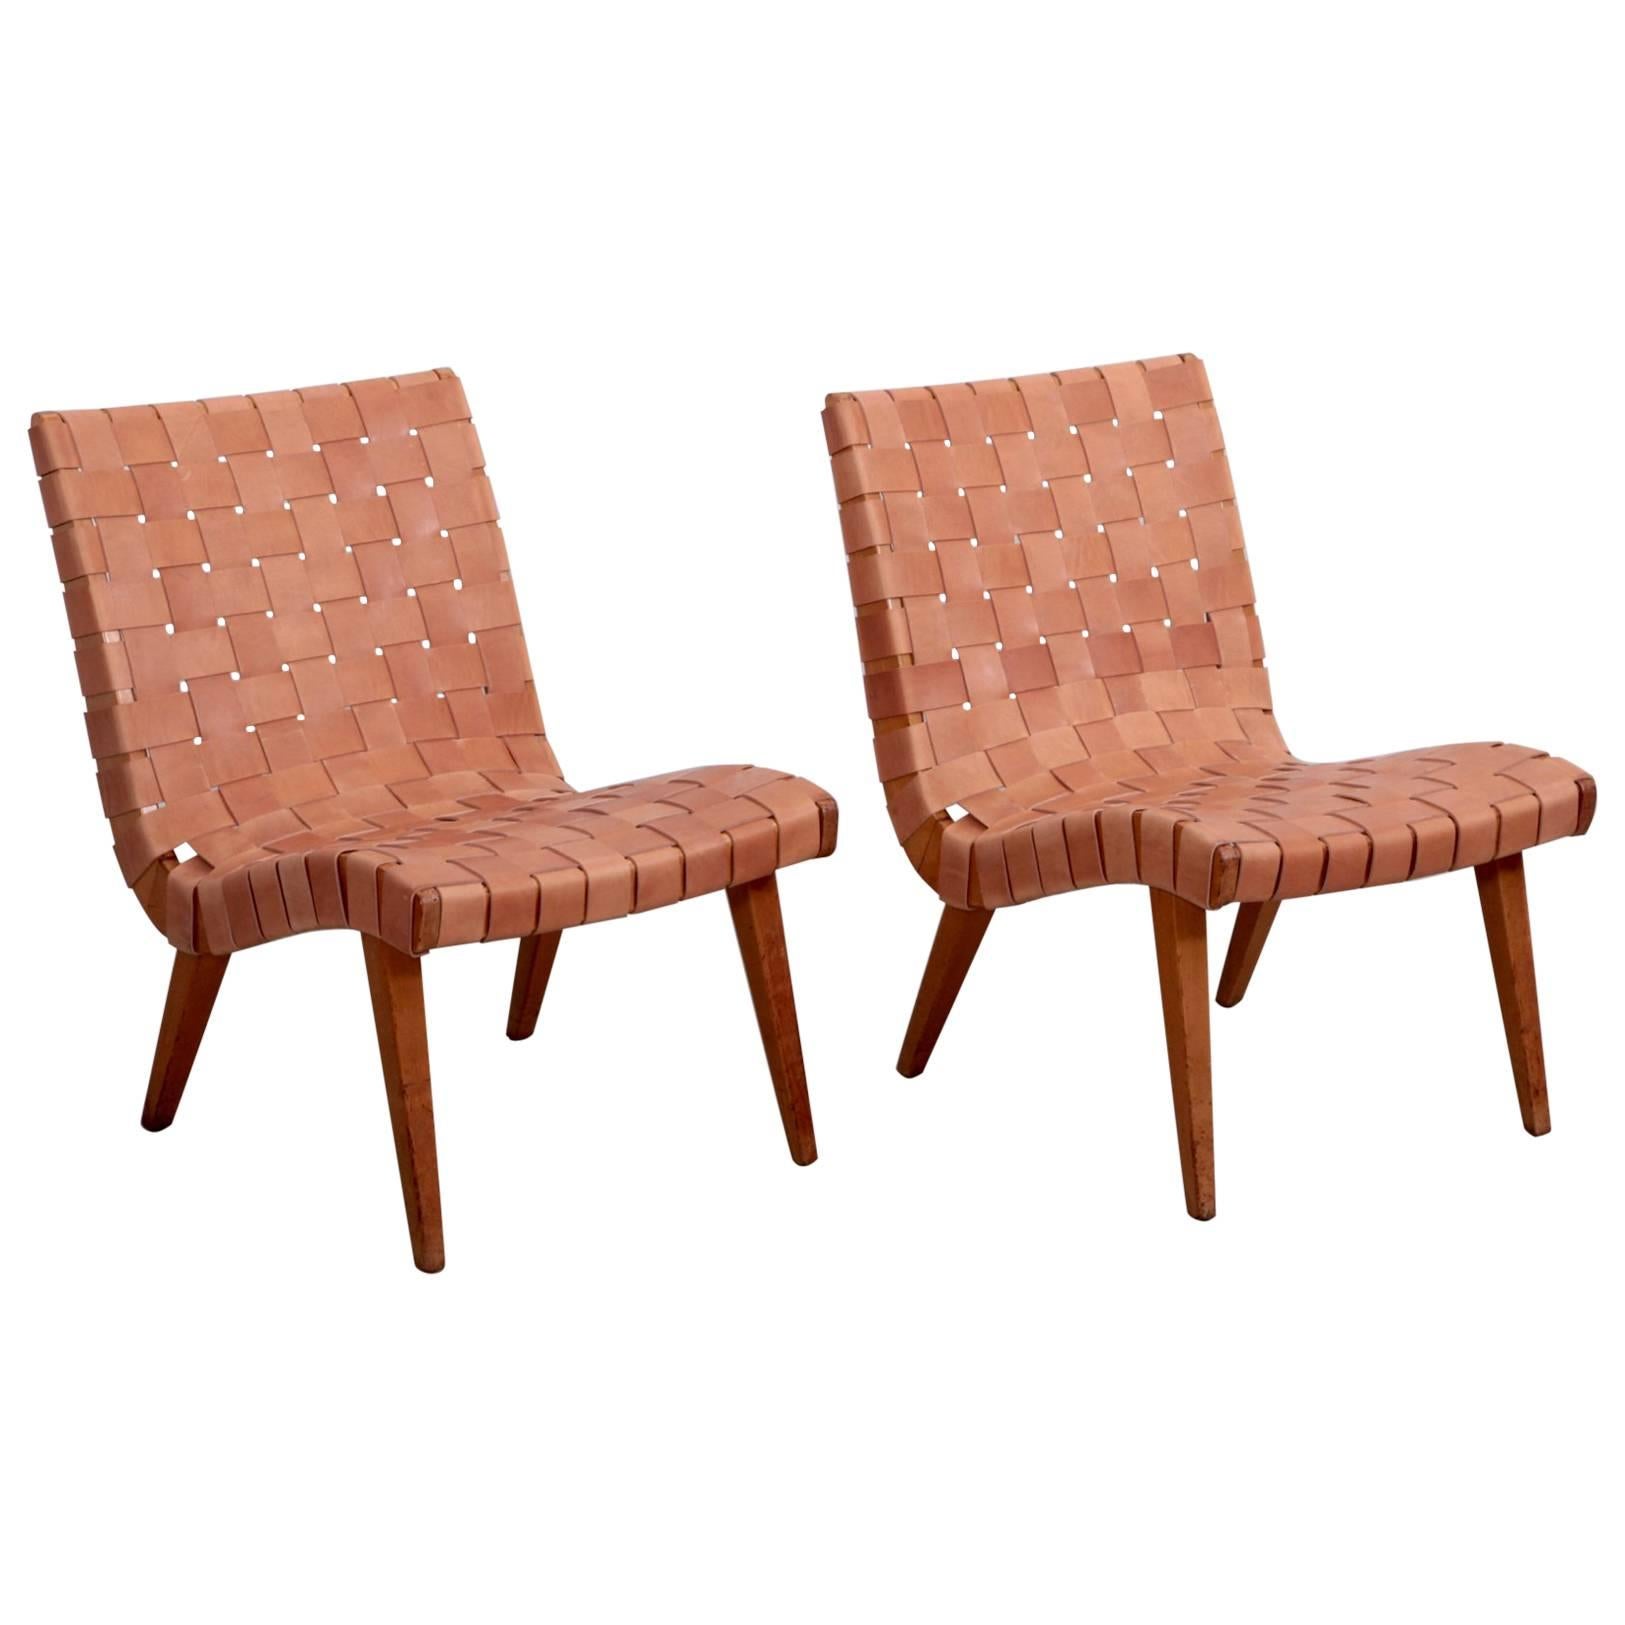 Pair of Early Jens Risom 654W Lounge Chairs by Knoll with New Leather Webbing